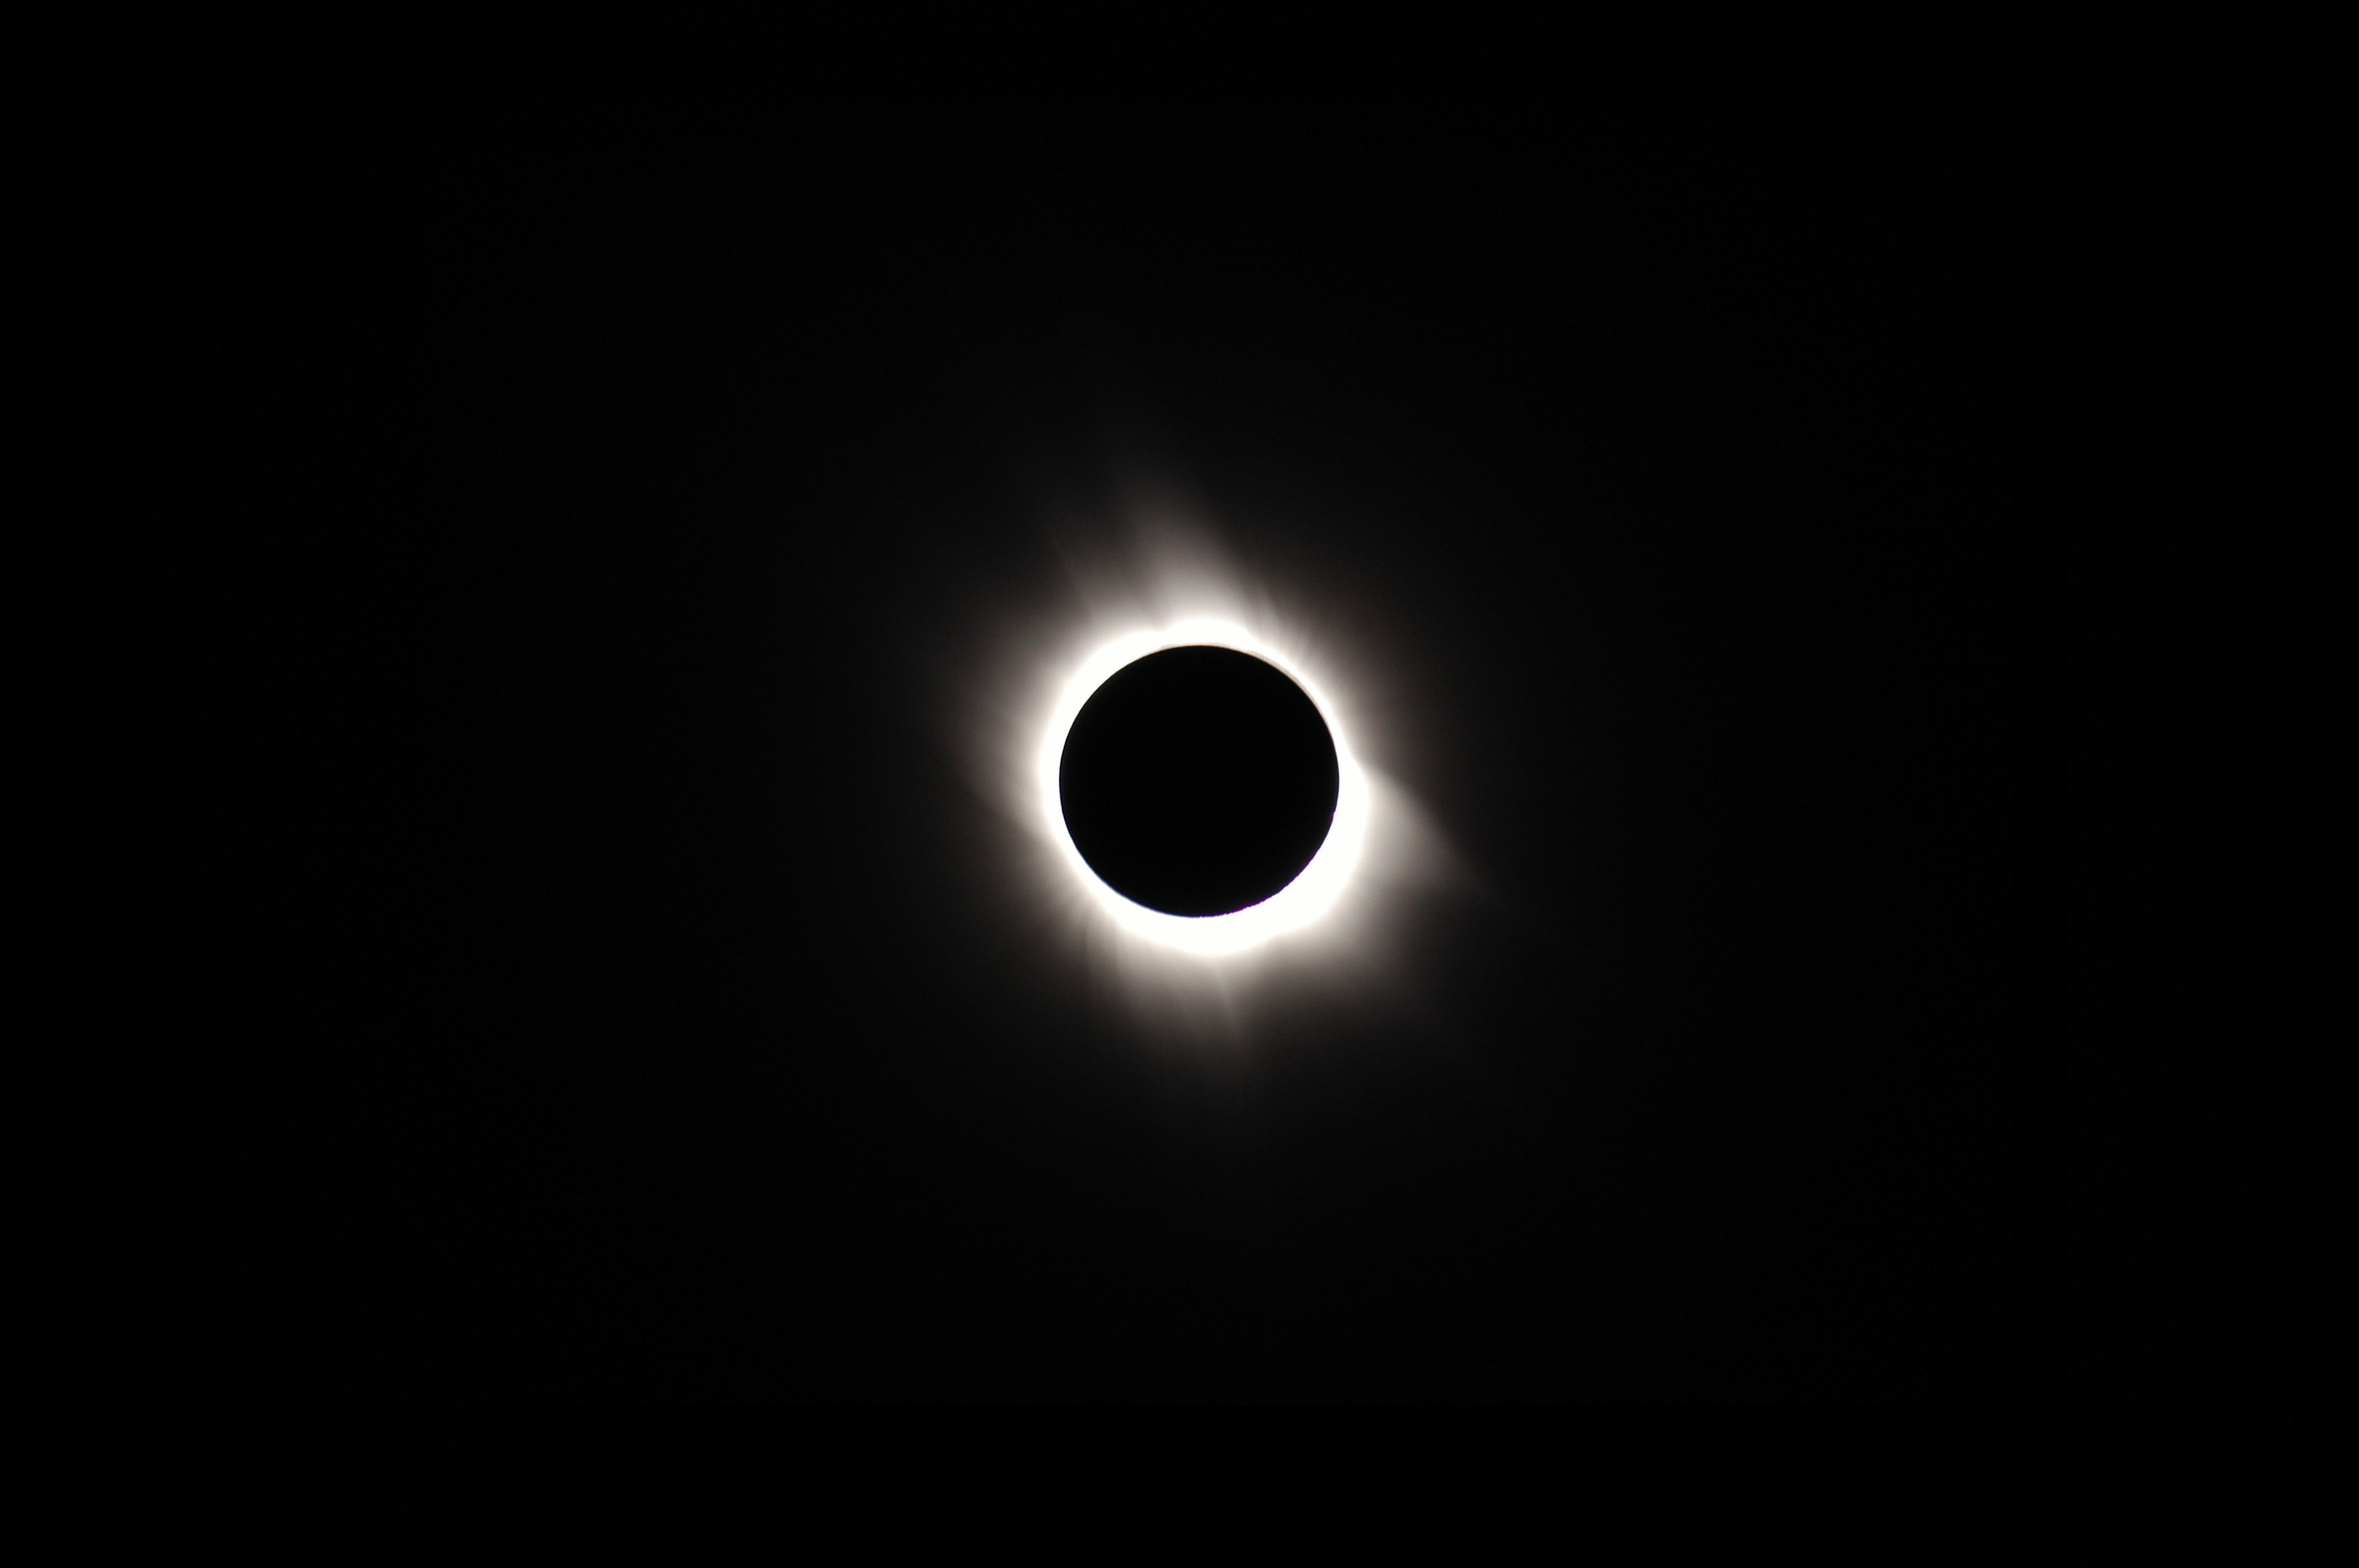 3008x2000 Make the total eclipse last forever with these 25 HD wallpapers - deTeched